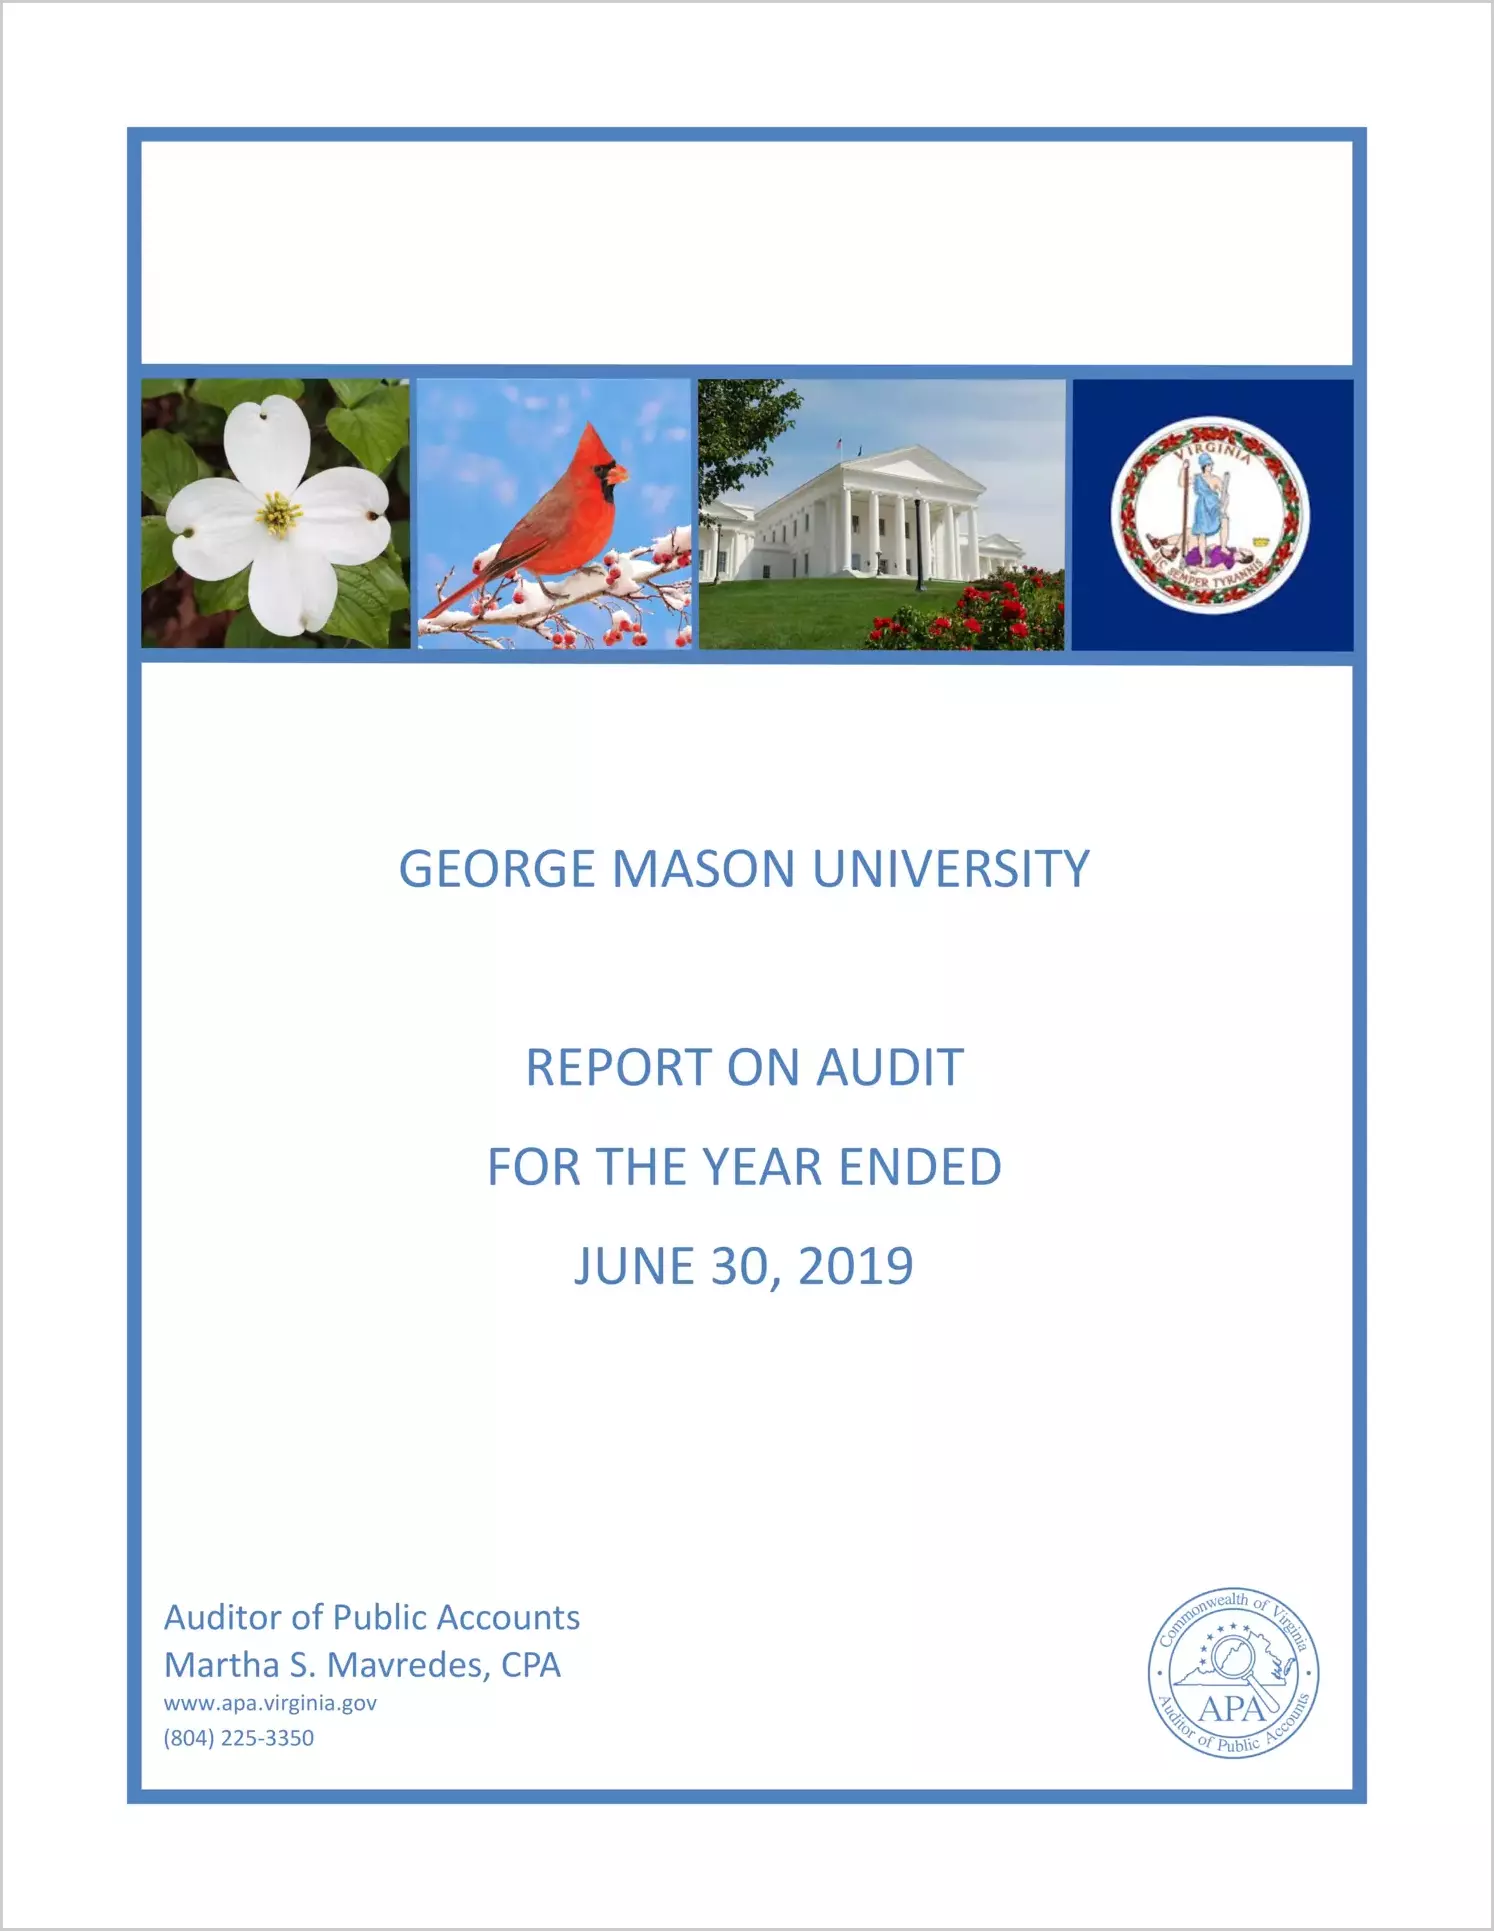 George Mason University for the year ended June 30, 2019